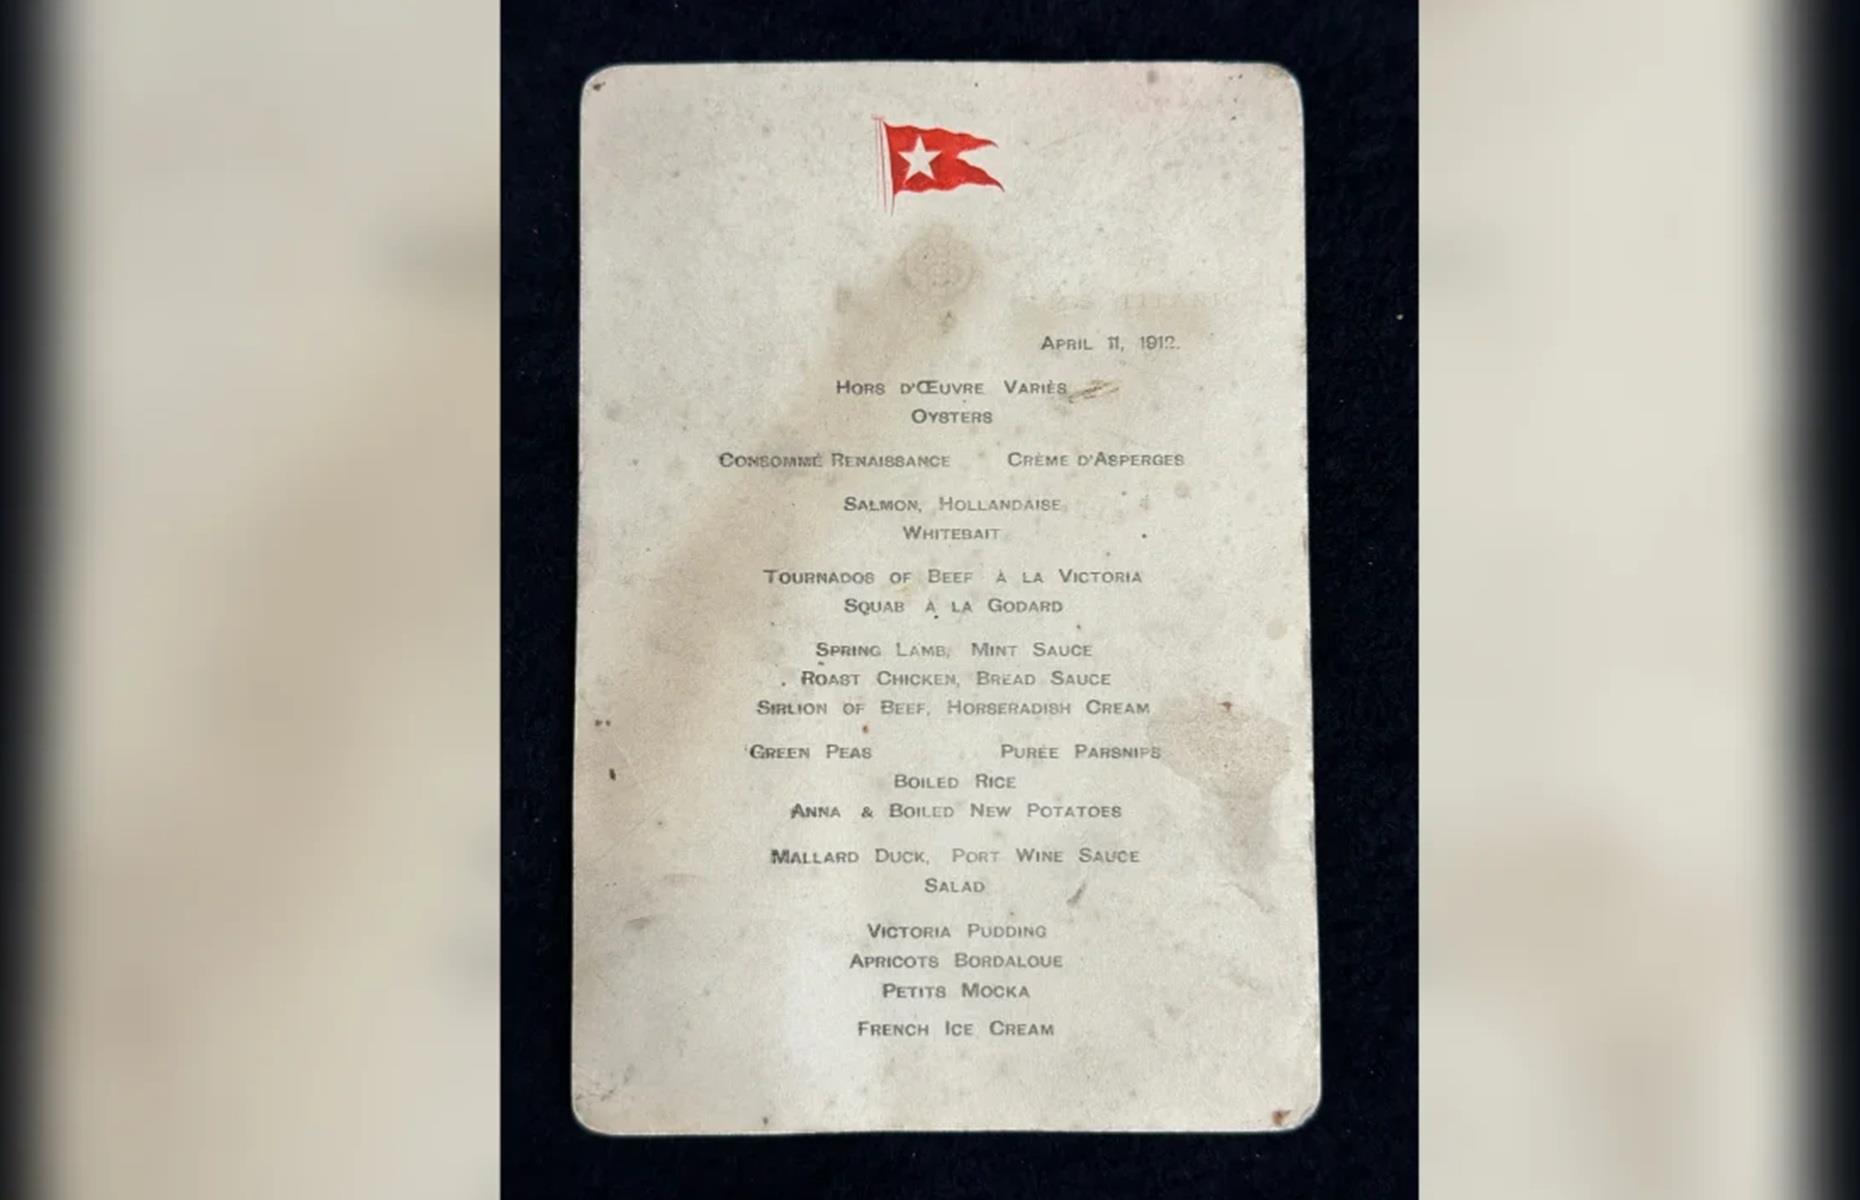 <p>Water stains usually make an item less desirable on the auction block – but for this first-class menu, they tell a chilling tale. According to London auction house Henry Aldridge and Son Ltd, this menu likely spent time in the Atlantic Ocean before being salvaged and is the only copy from the night of April 11, 1912 that's known to have survived.</p>  <p>The menu reveals first-class passengers would have enjoyed oysters, a choice of lamb, chicken or beef, and apricot tart. It was discovered in a 1960s photo album belonging to an historian in Nova Scotia, Canada, and went up for auction on November 11, selling for $102,000.</p>